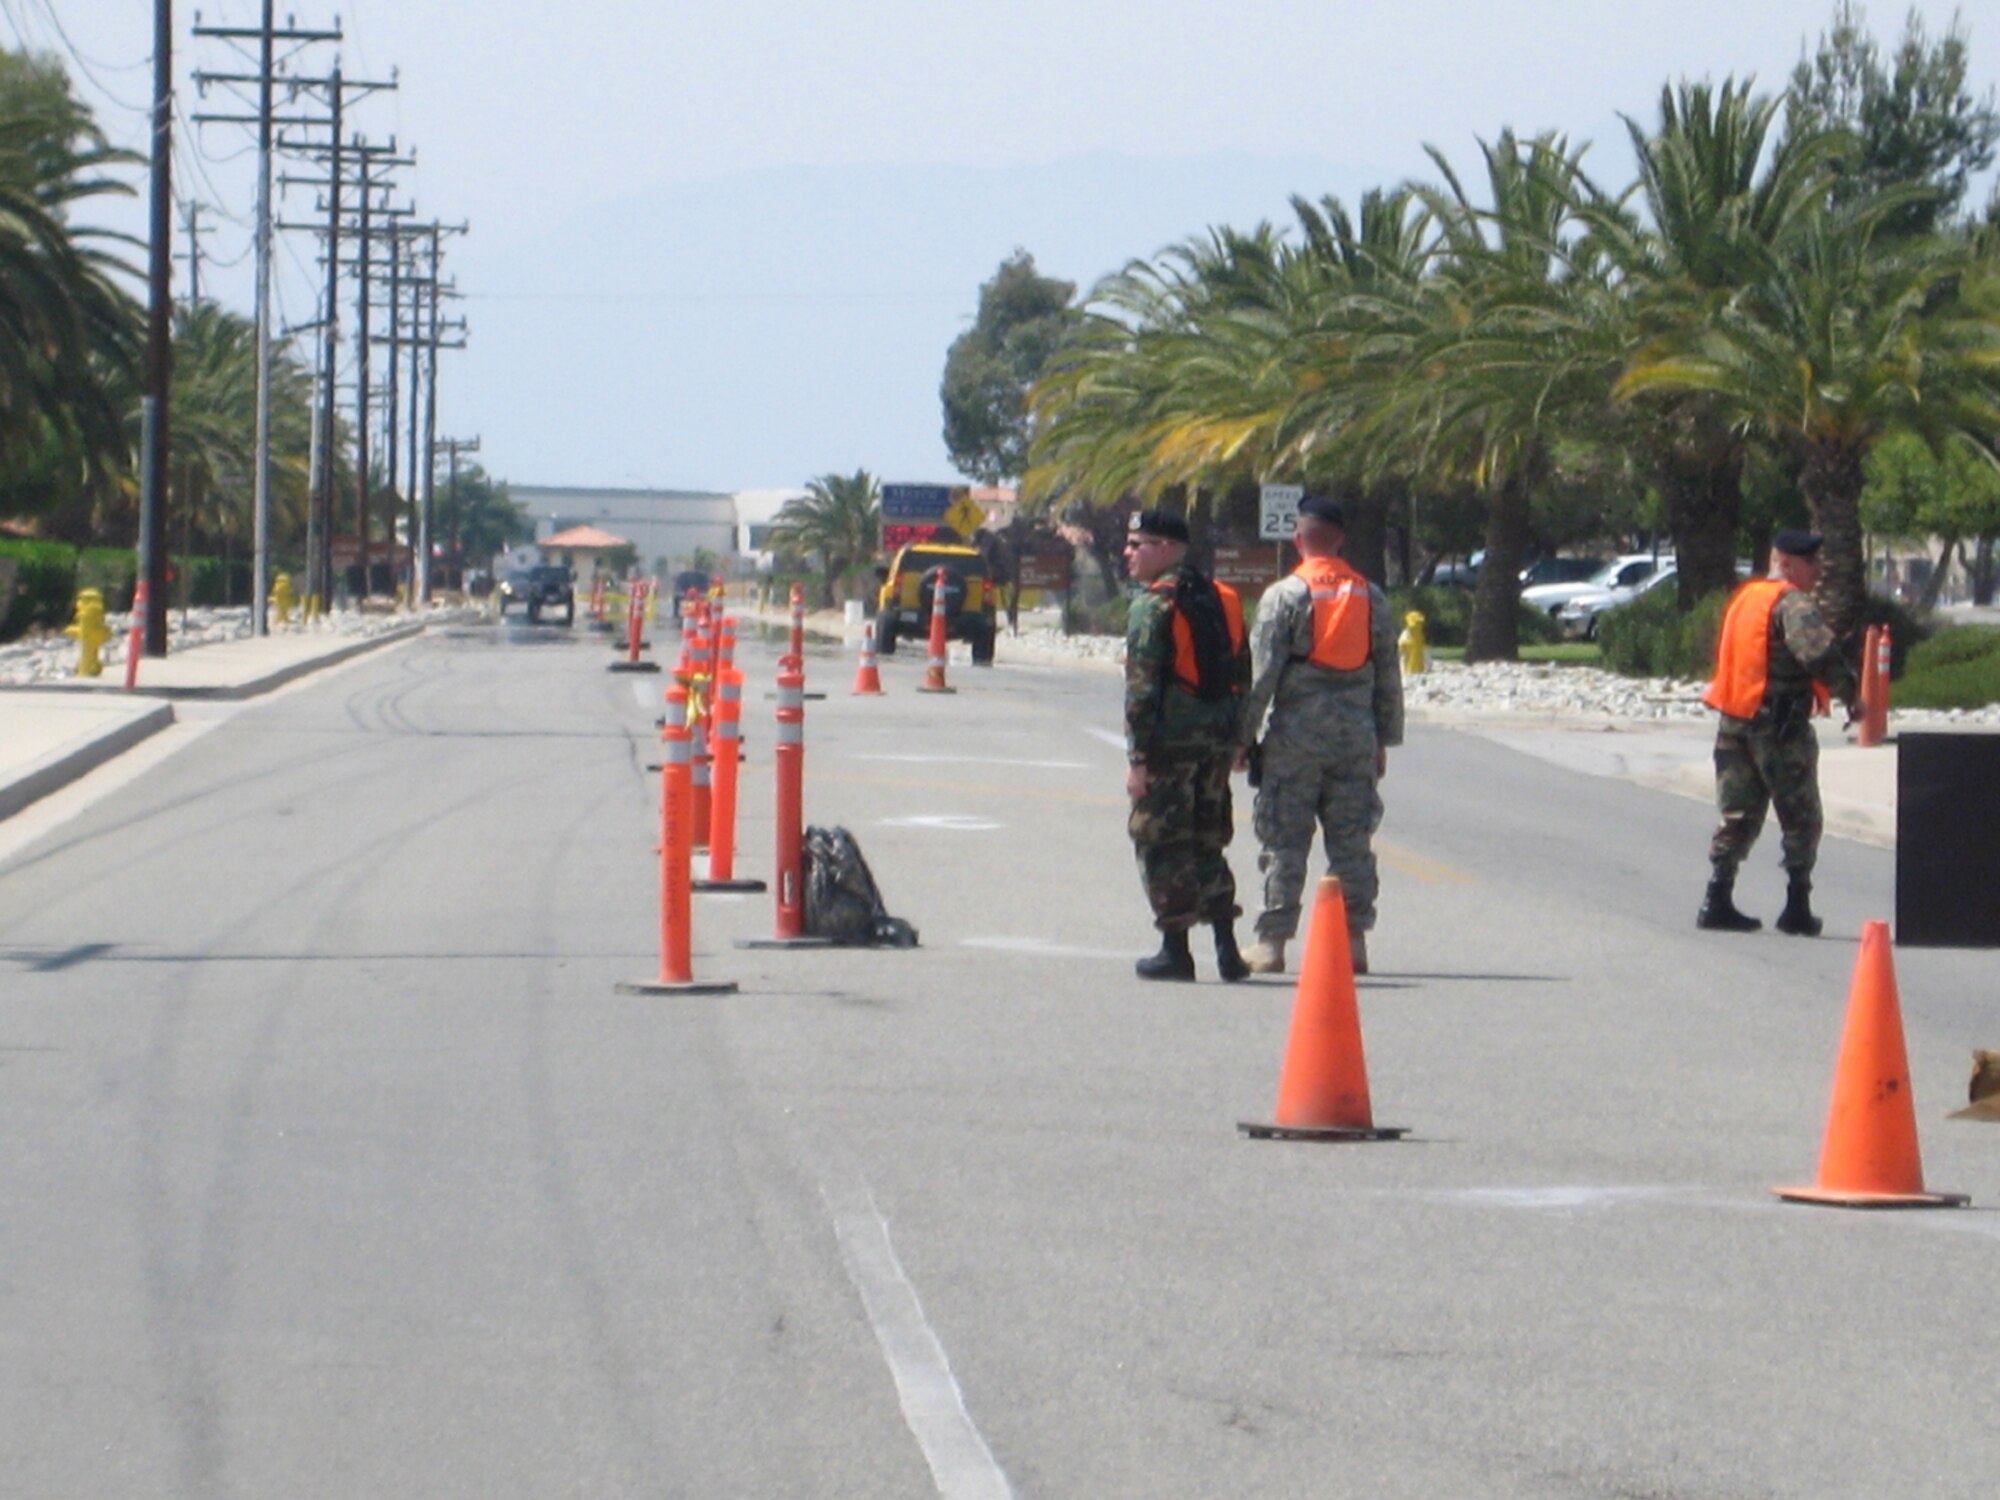 WRIGHT-PATTERSON AFB, Ohio - Reservists from the 445th Security Forces Squadron, place cones on the street to direct traffic during the Thunder Over the Empire Air Show at March Air Reserve Base, Calif.  The Airmen augmented March ARB Security Forces for the two day event that hosted about 400,000 people. (Courtesy photo) 